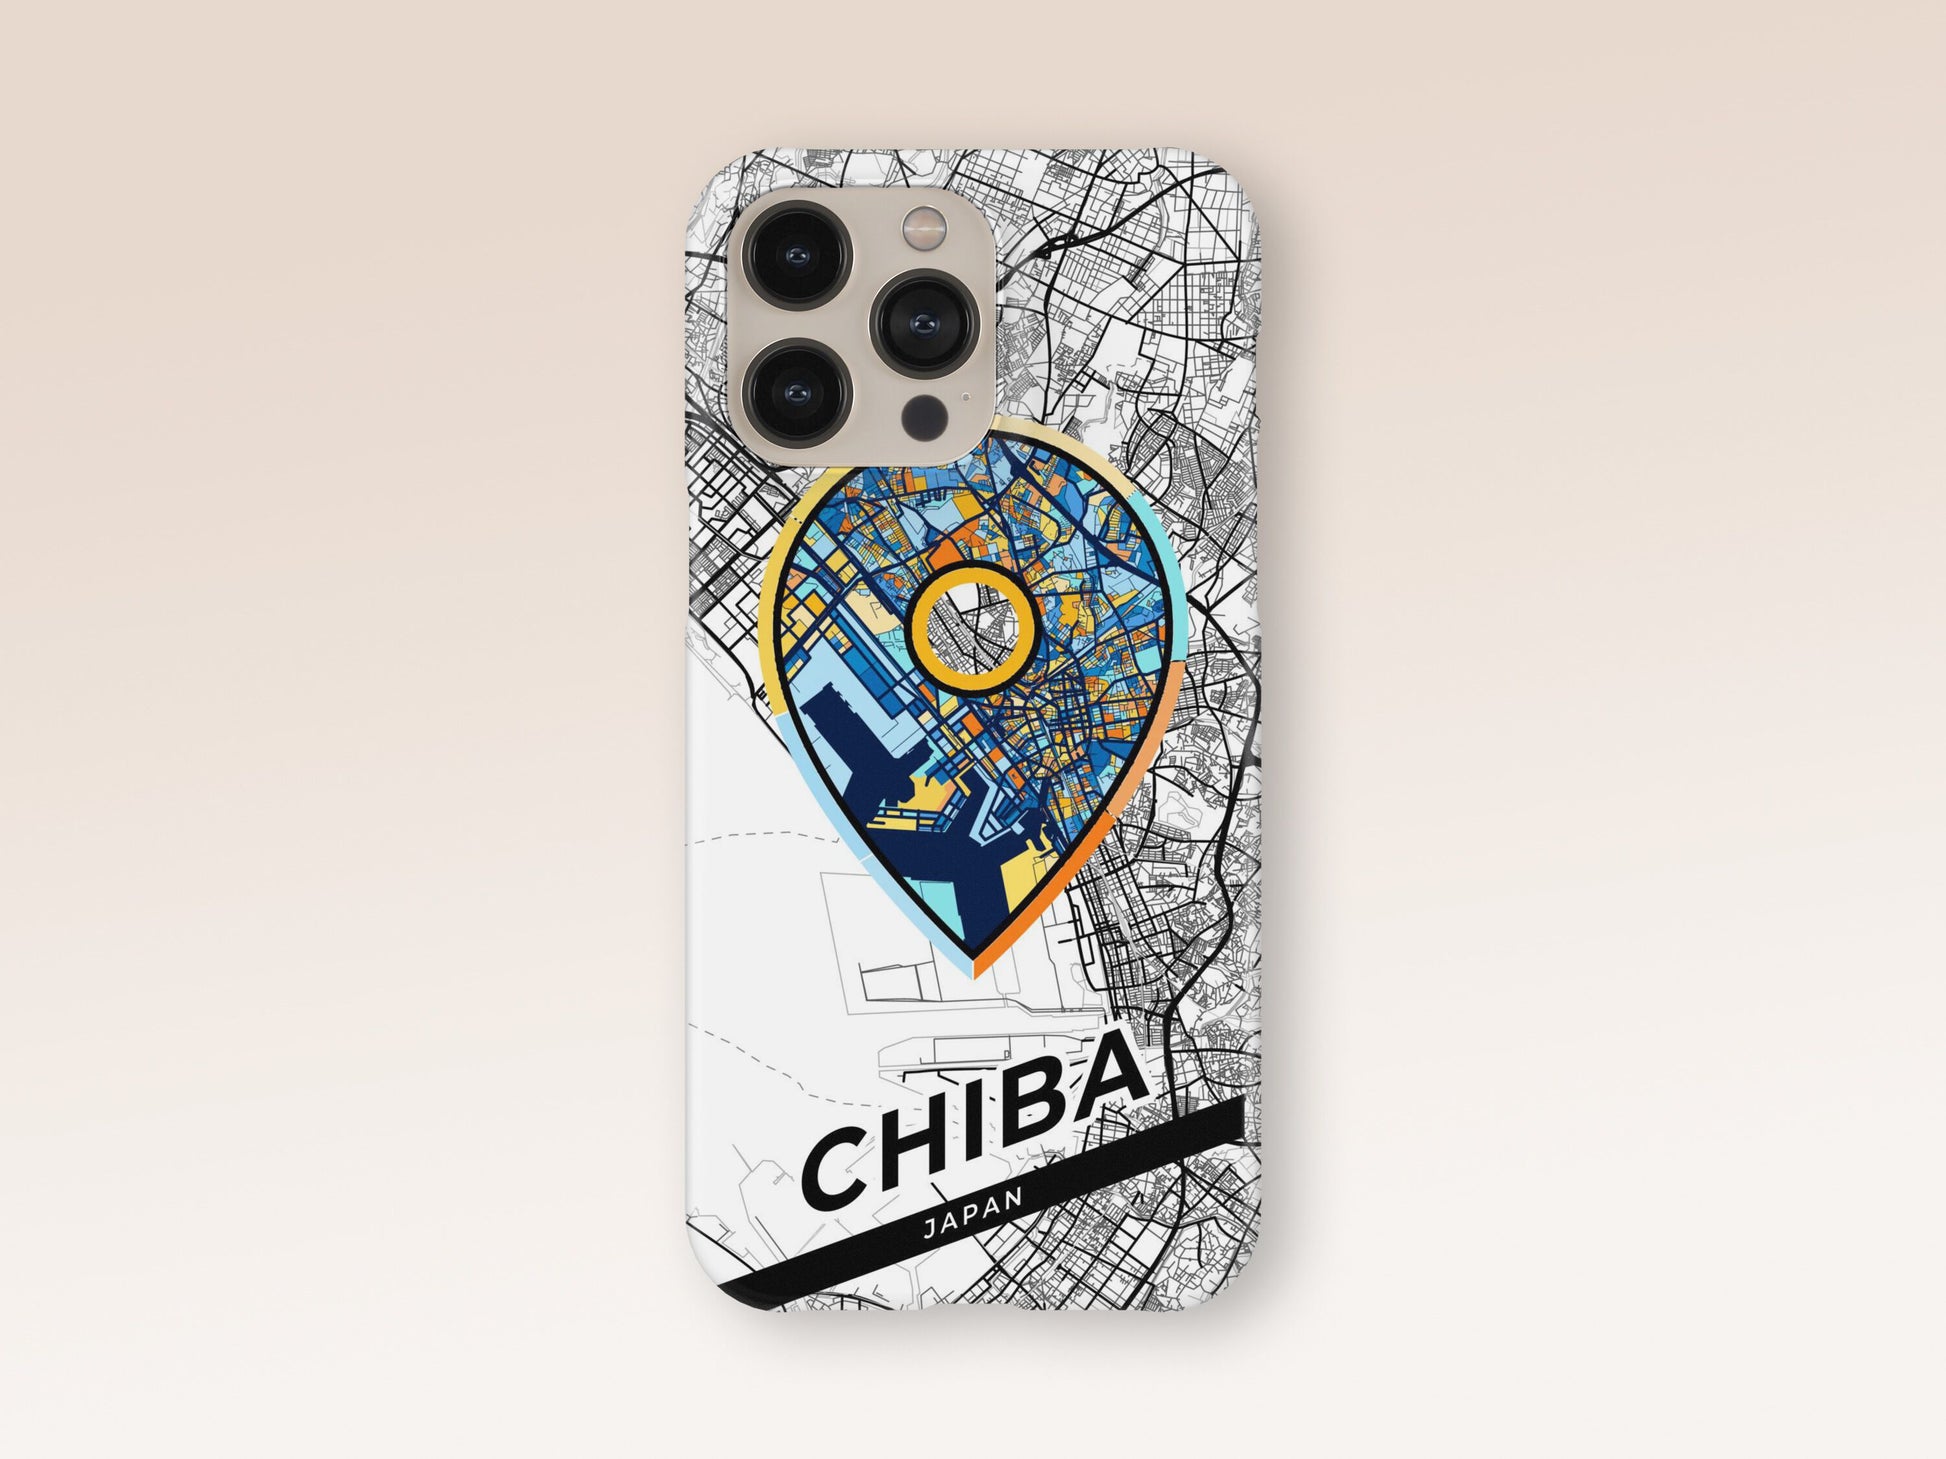 Chiba Japan slim phone case with colorful icon. Birthday, wedding or housewarming gift. Couple match cases. 1